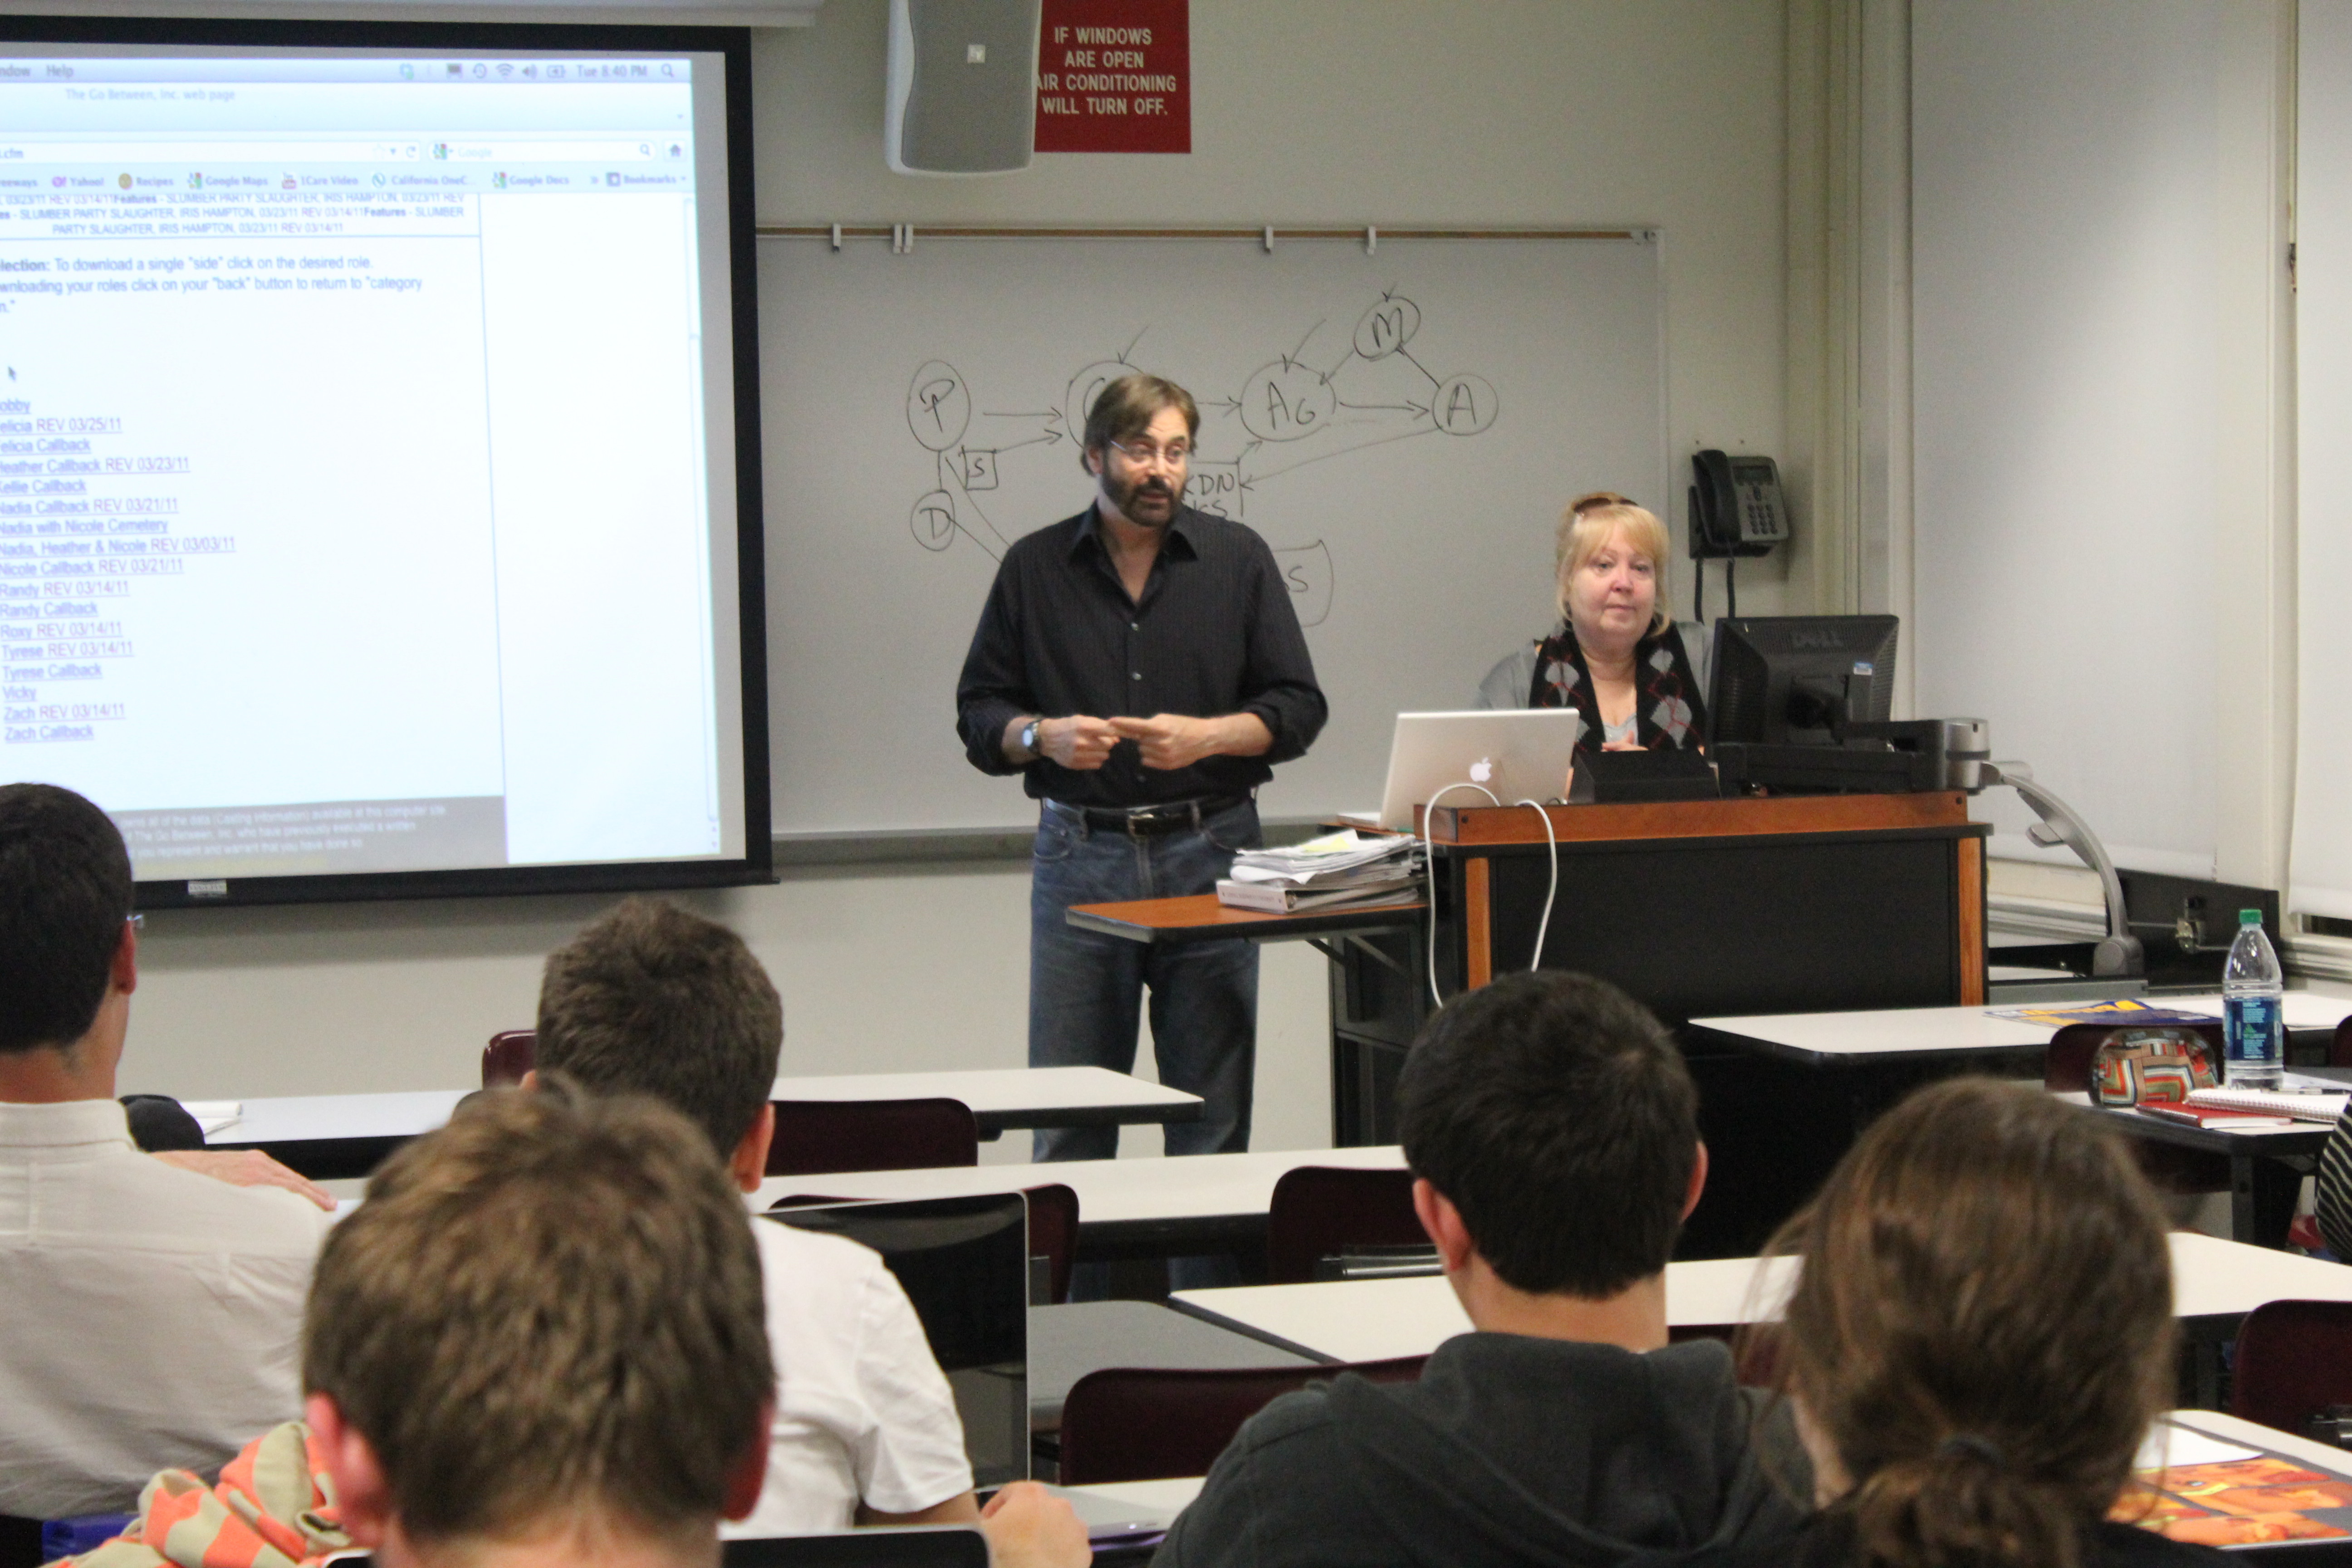 March 29, 2011, Seth was invited to be a Guest Lecturer at Loyola Marymount University. Here he is interacting with the Film Director's class.